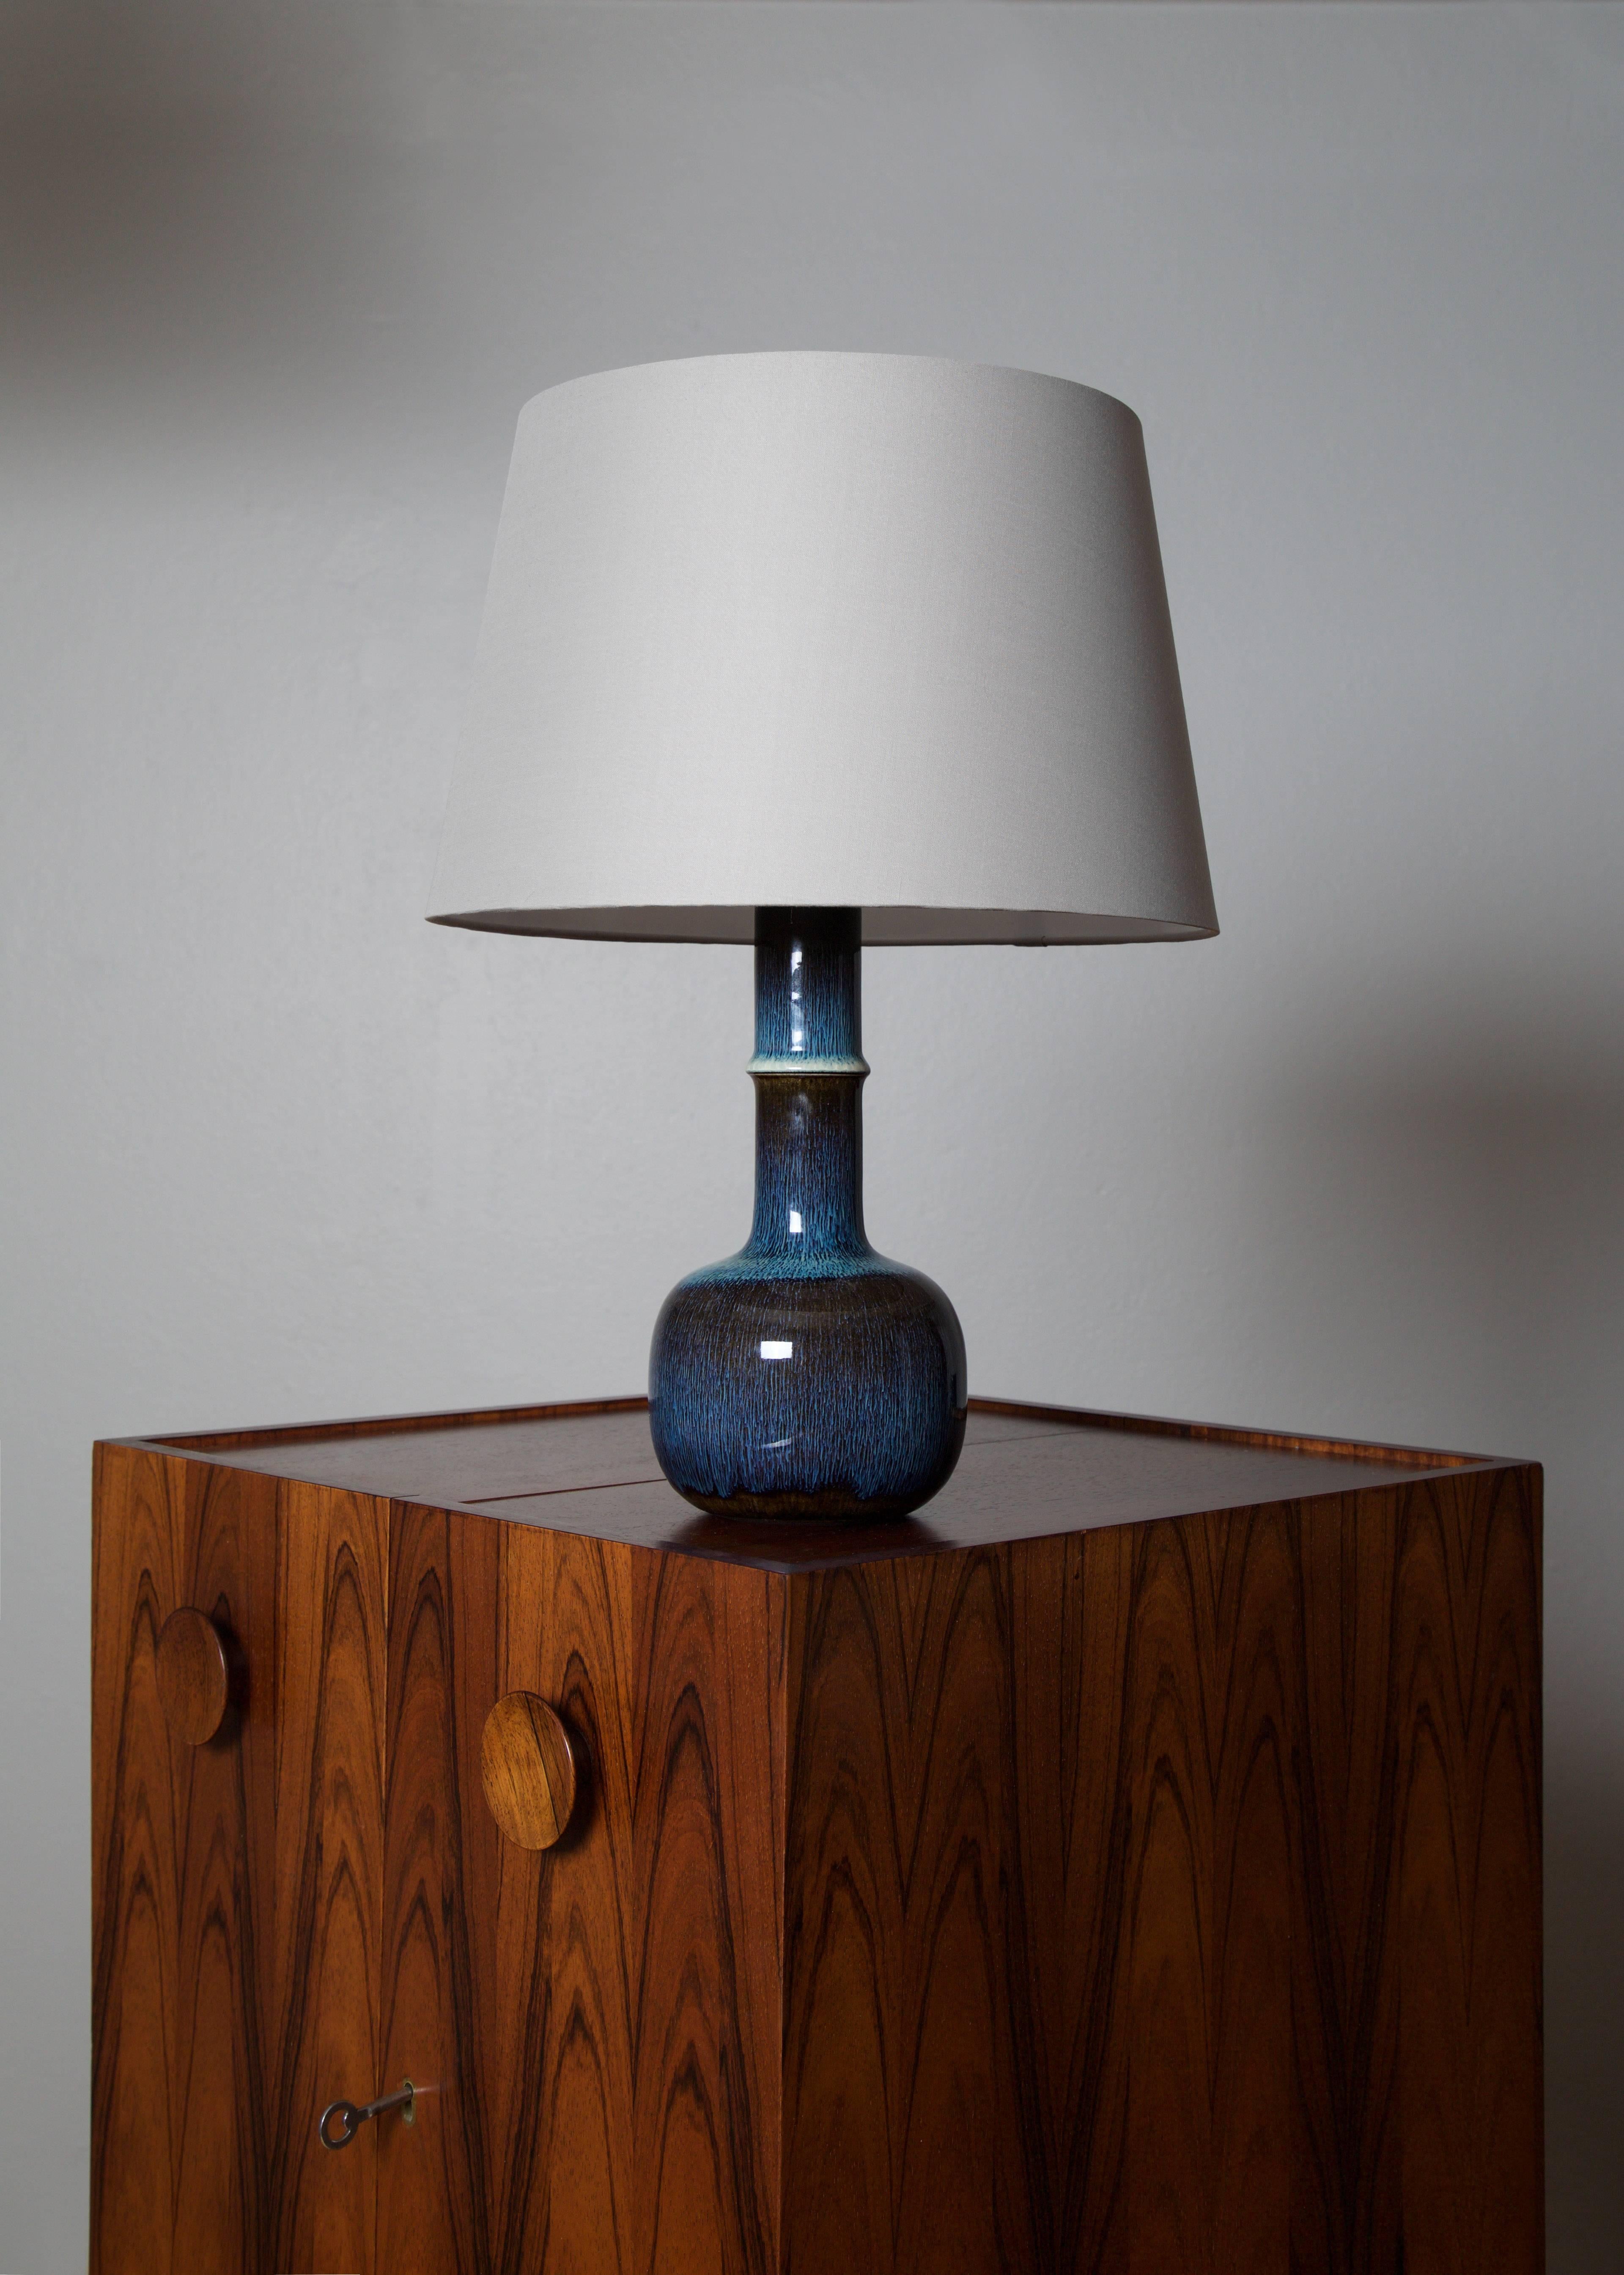 Hand-Crafted Carl-Harry Stalhane Unique Table Lamp, Rörstrand Ab, Sweden, 1950s